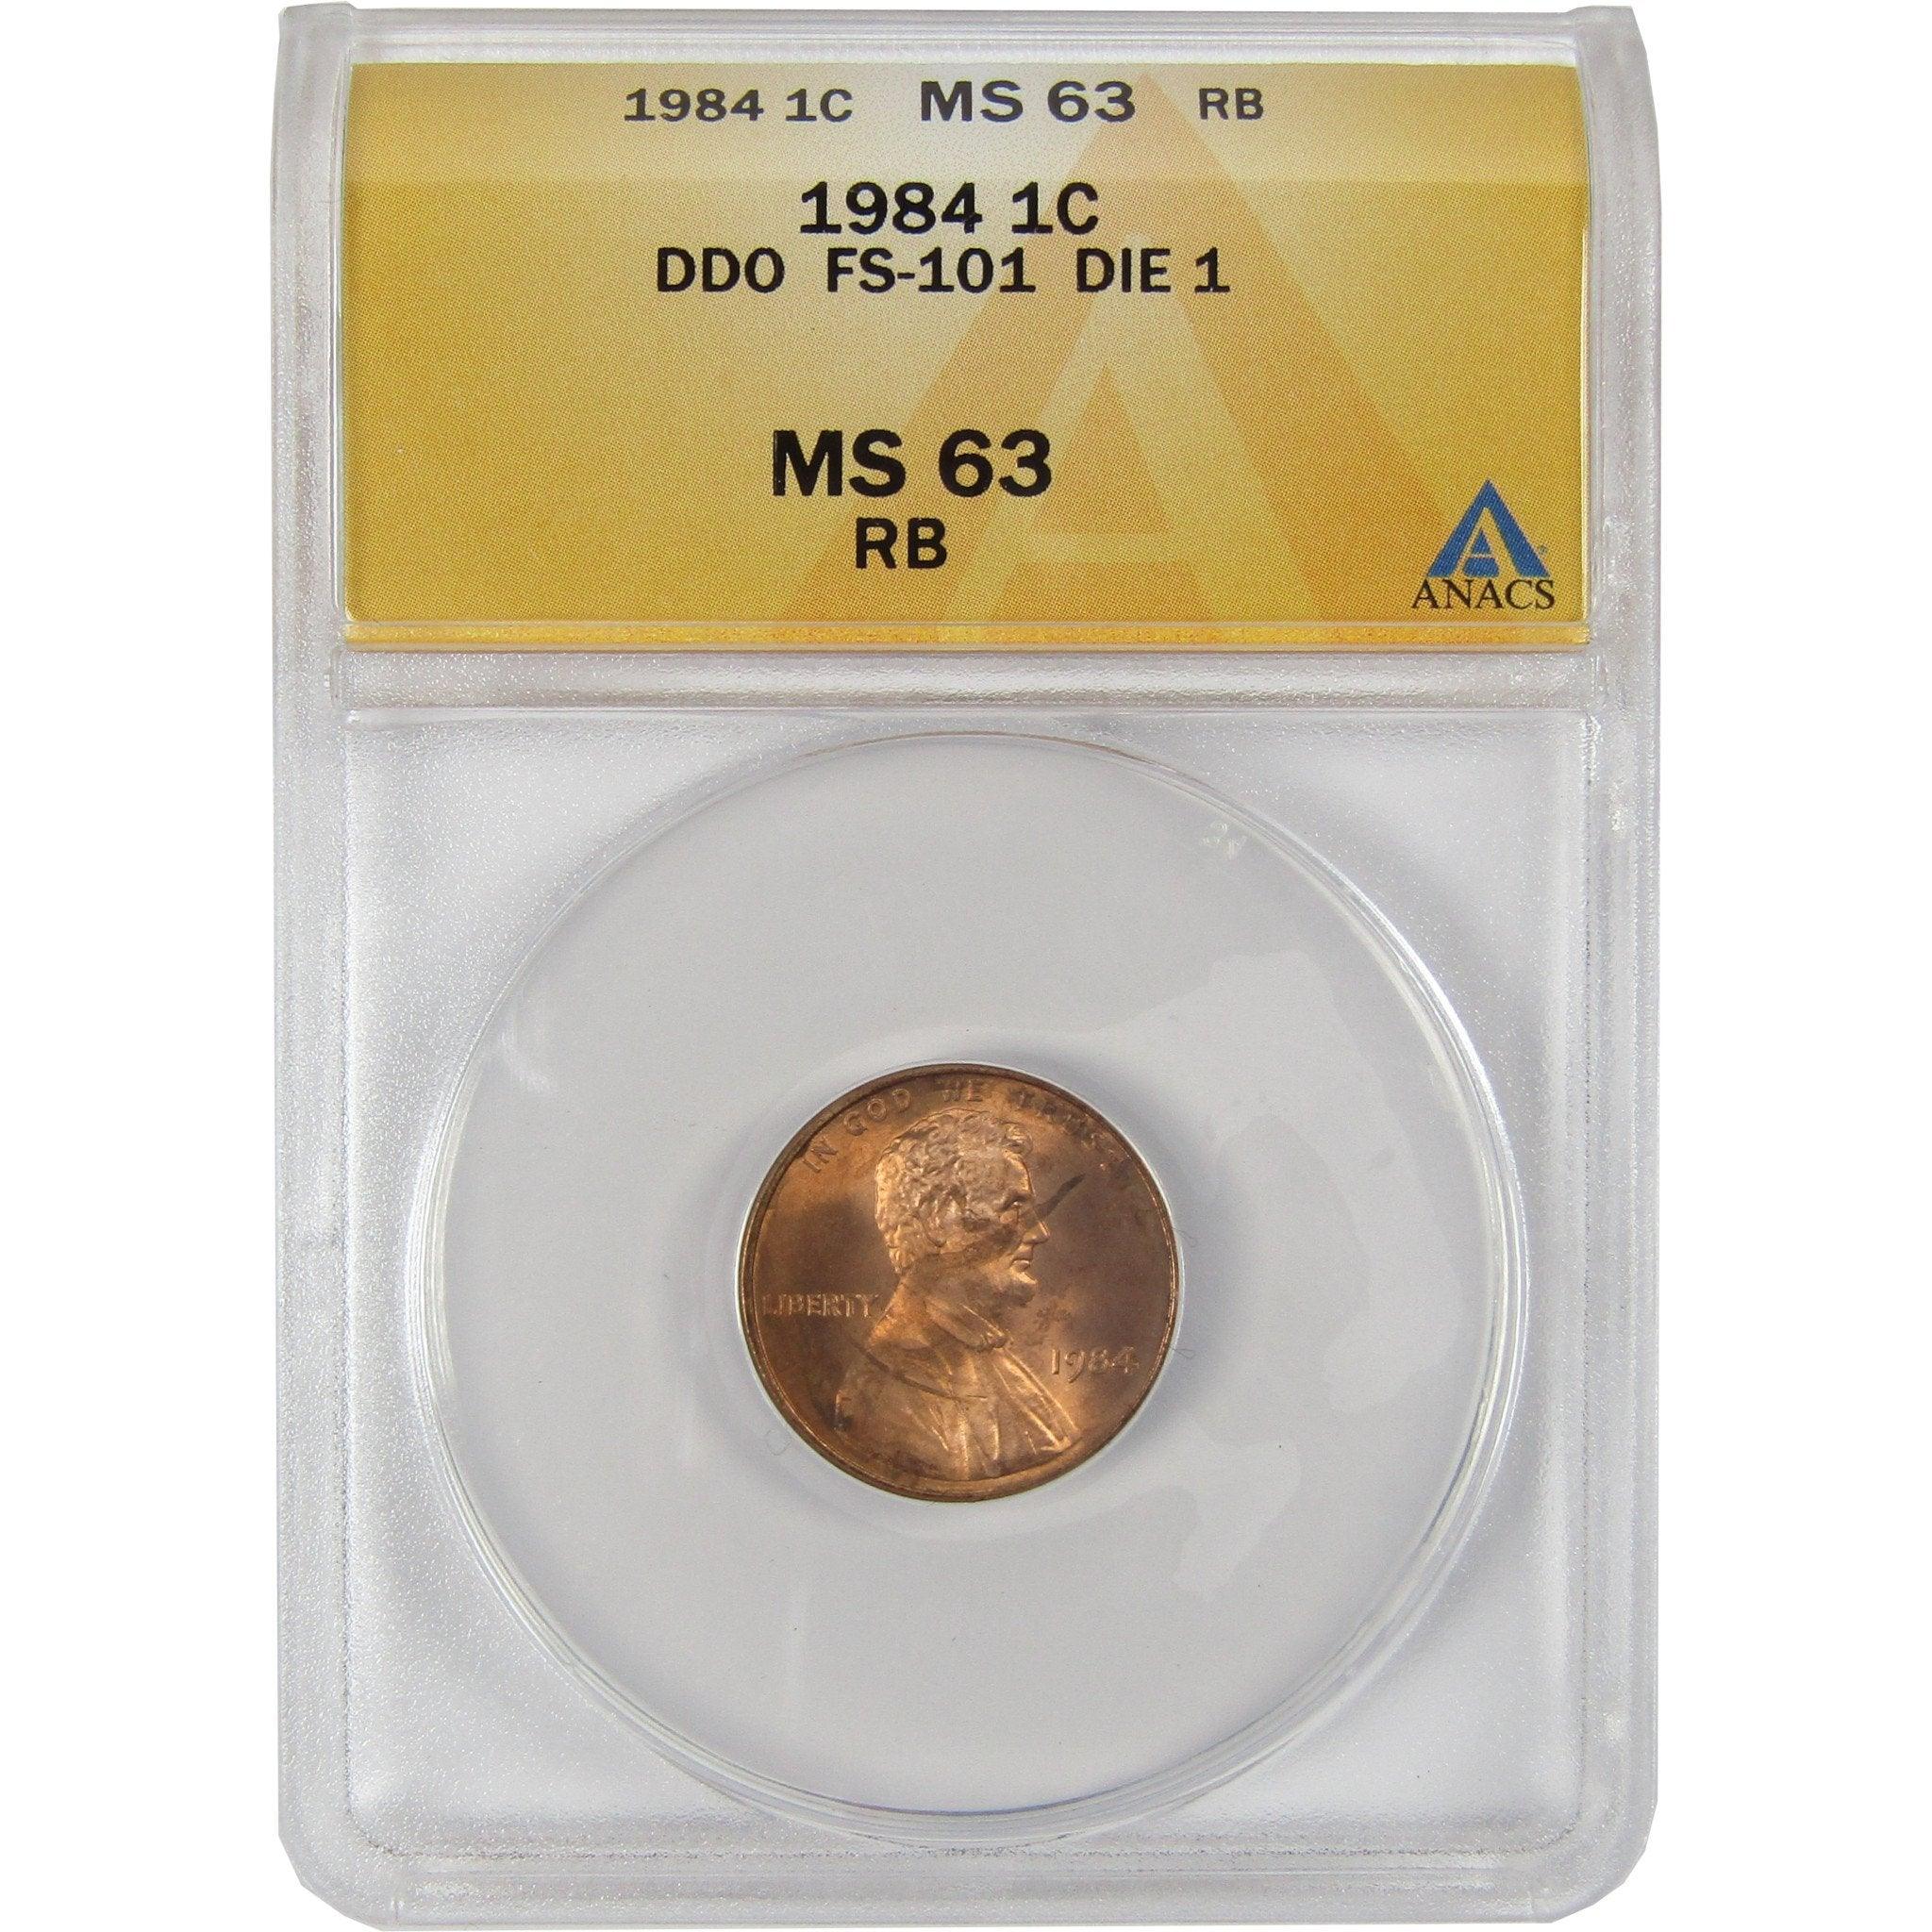 1955 1C DDO Lincoln Cent PCGS MS64RD